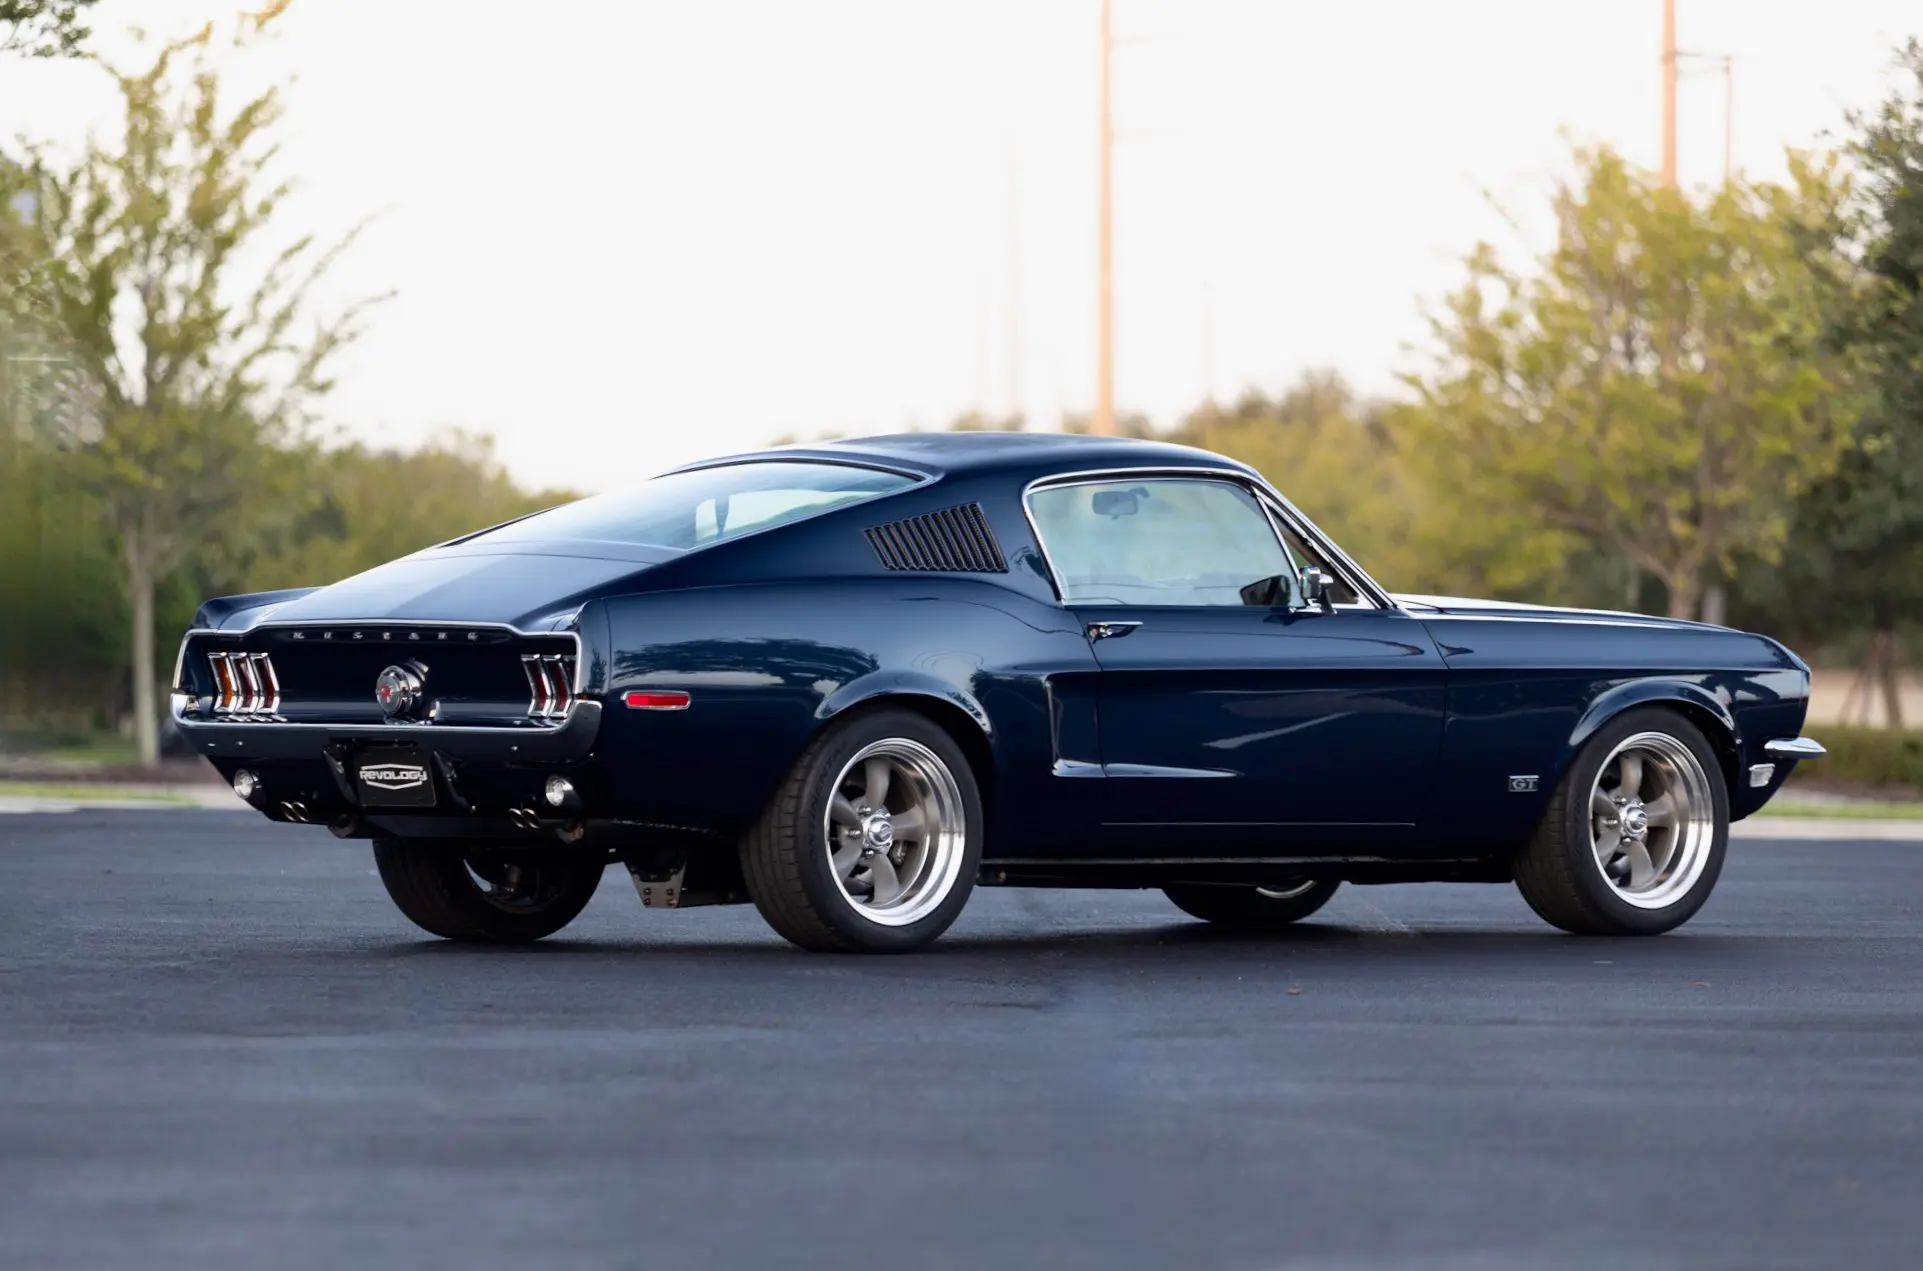 Royal Blue 1968 Mustang GT 2+2 Fastback with exceptional fit and flushness.